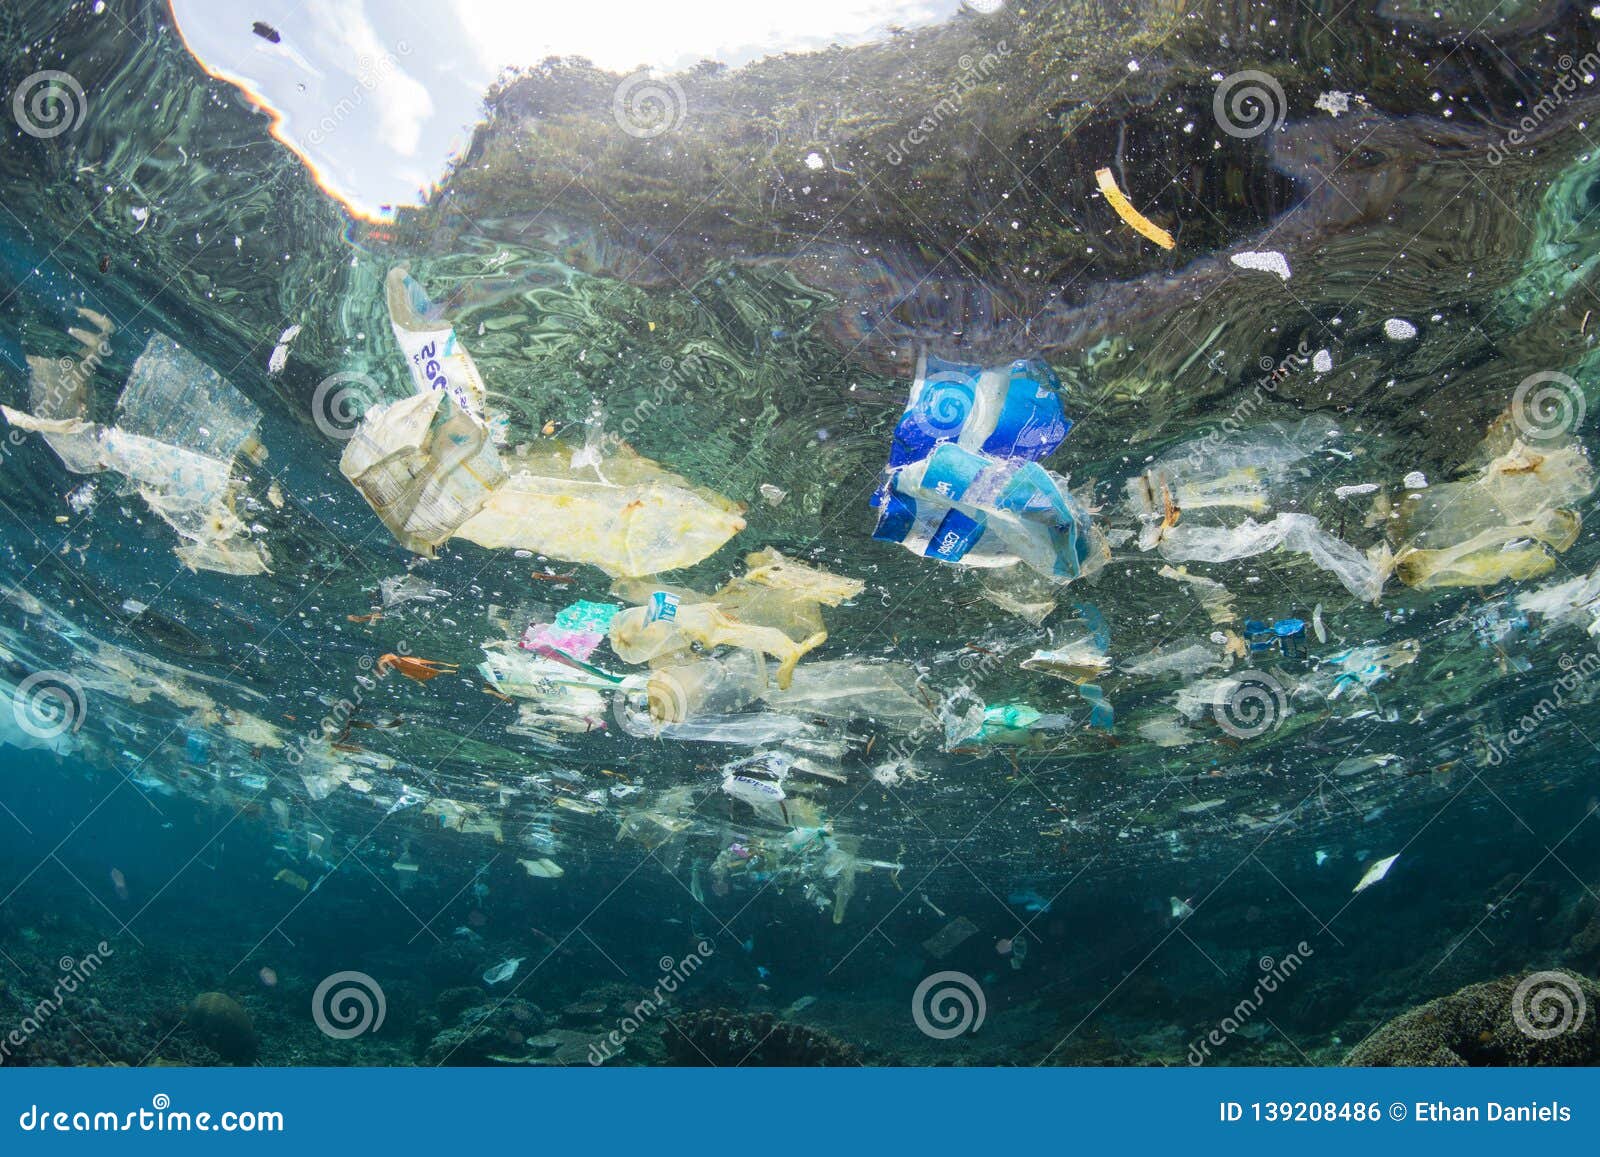 plastic bags and garbage in tropical pacific ocean